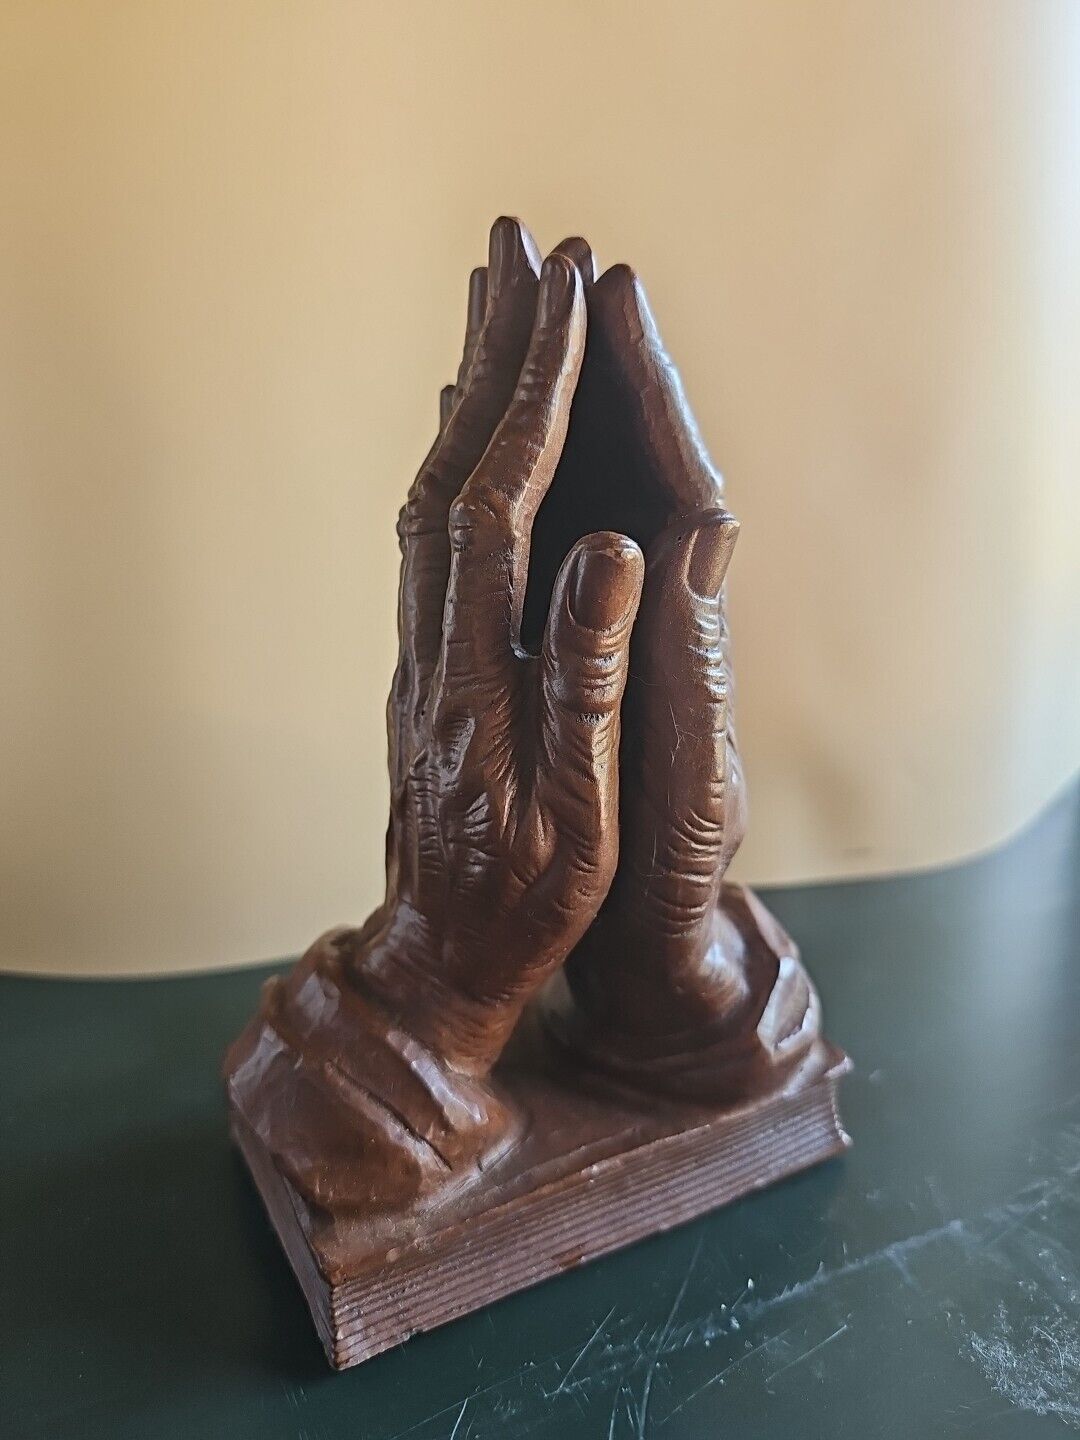 Red Mill Mfg Praying Hands Handcrafted USA  Figurine Religious dated 1997 #678